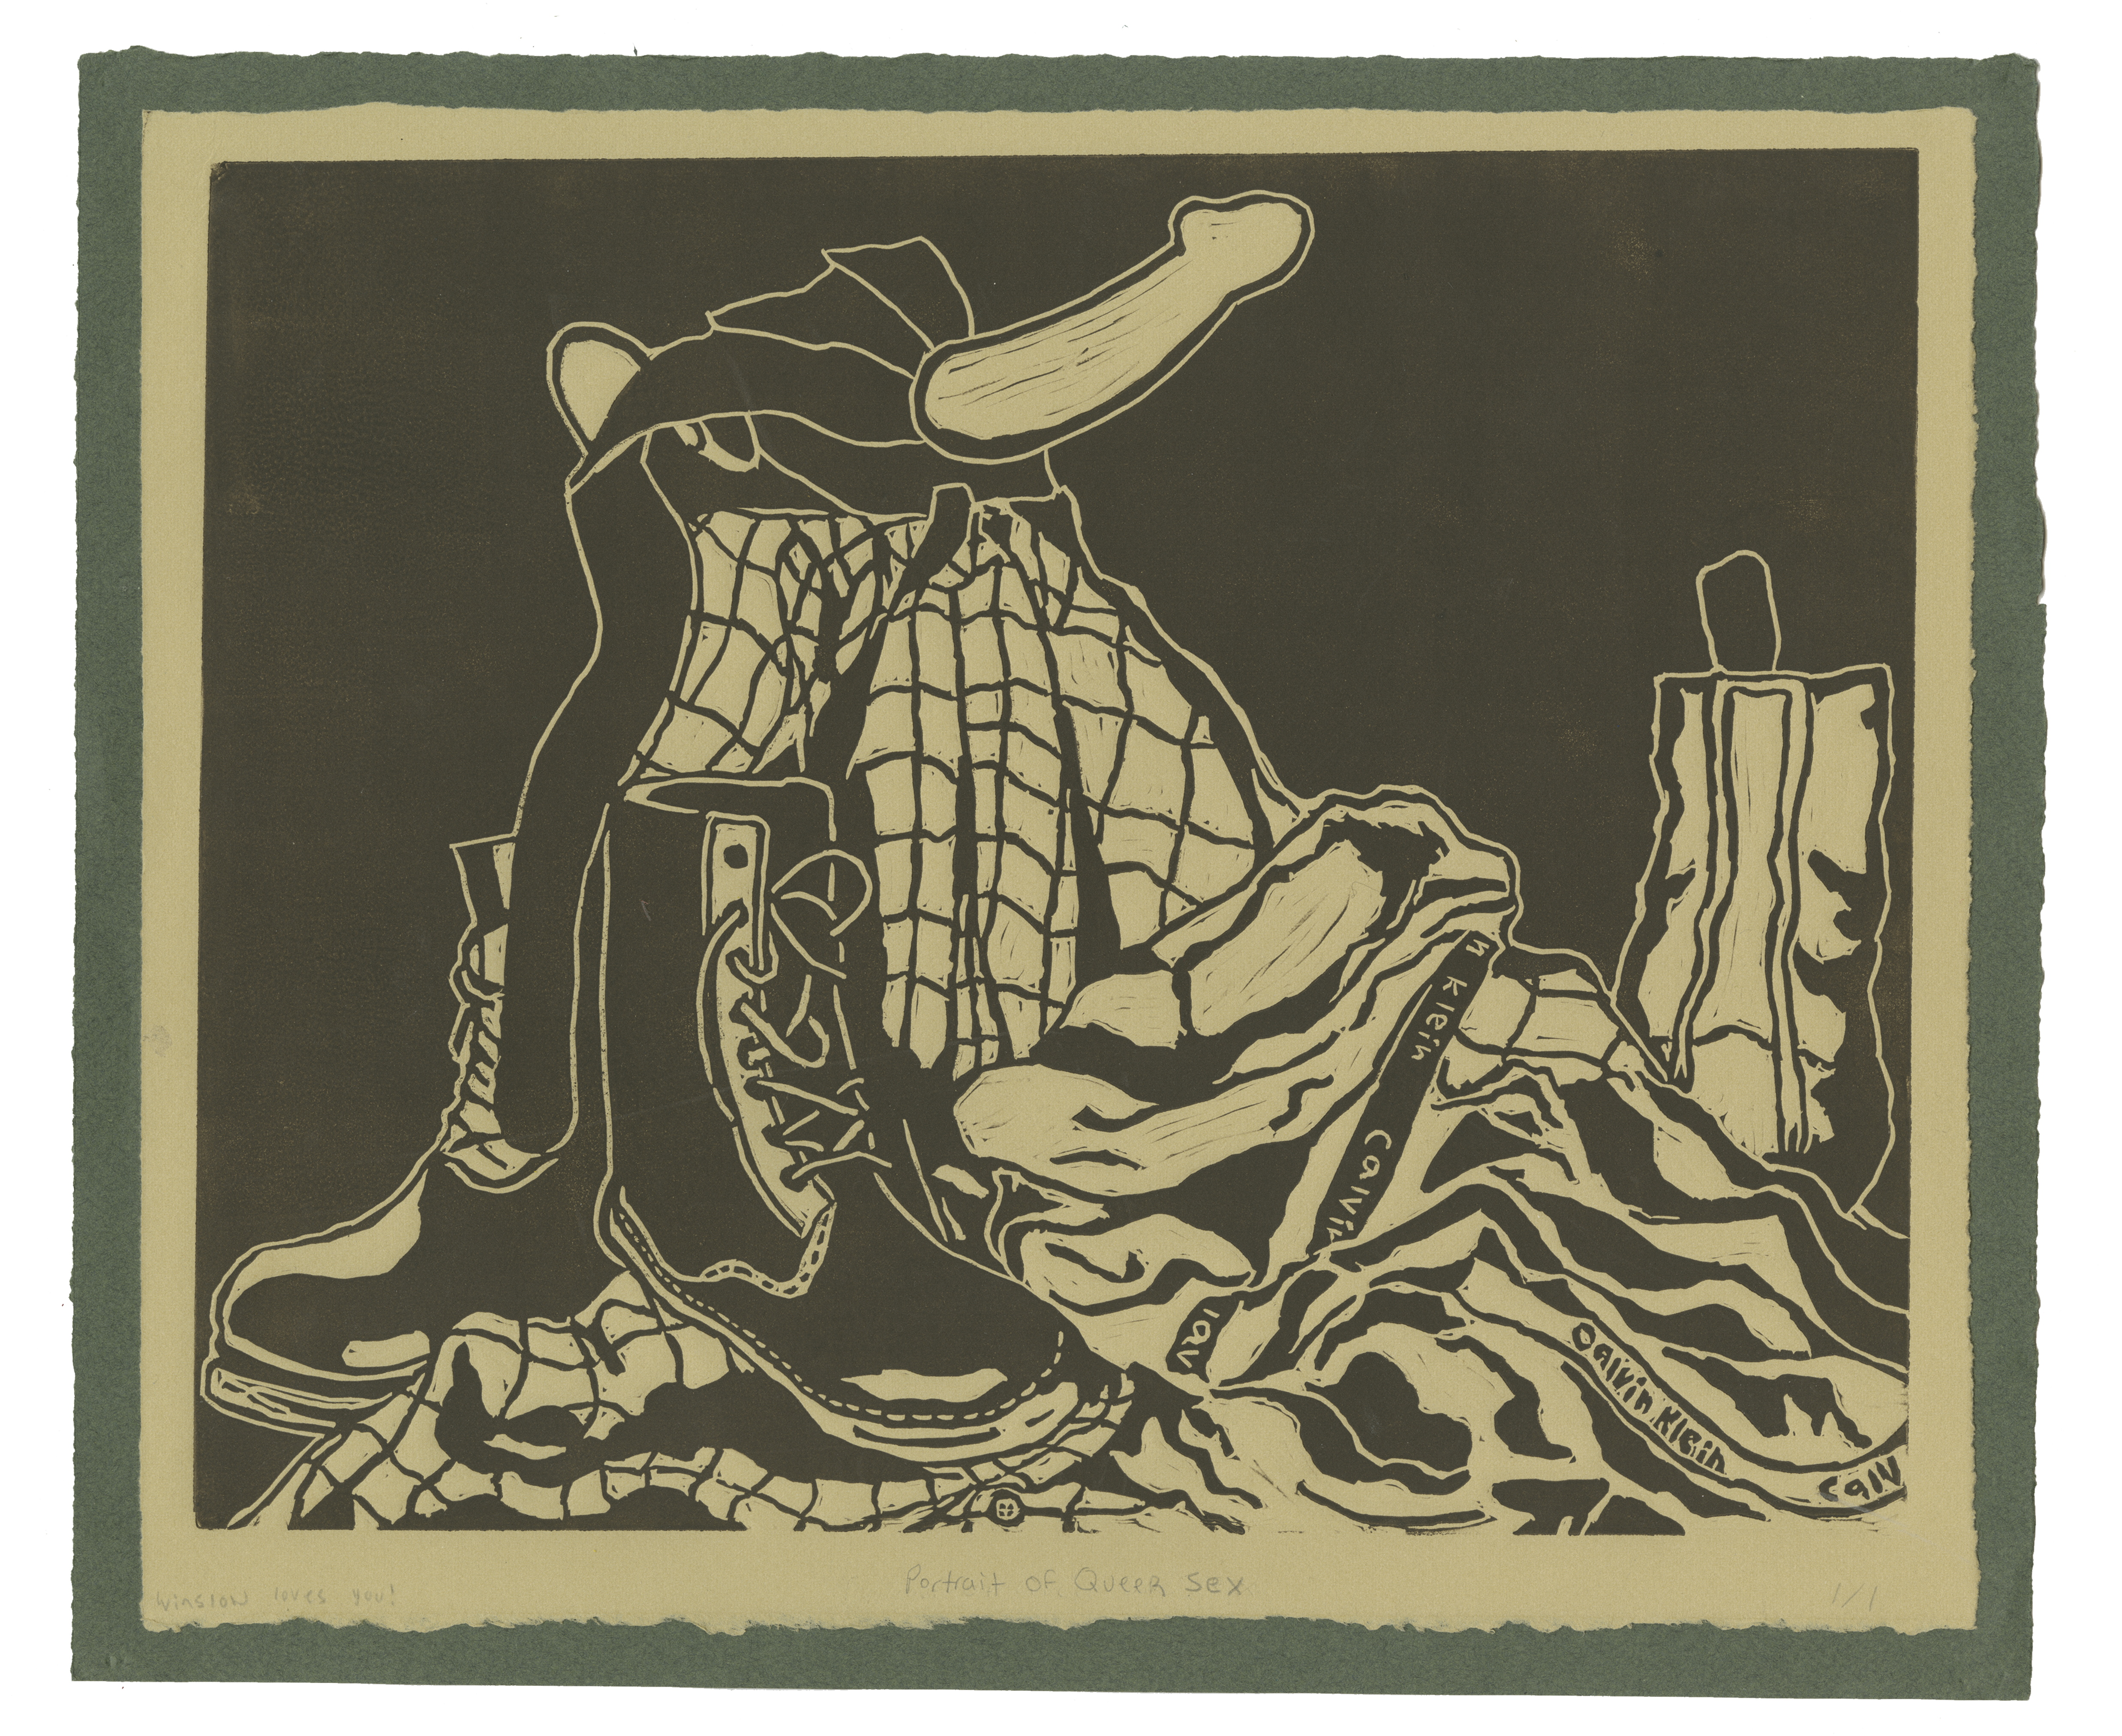 A relief print depicting a pile of flannel, Docs, Calvin Klein underwear, and a strap-on dildo.